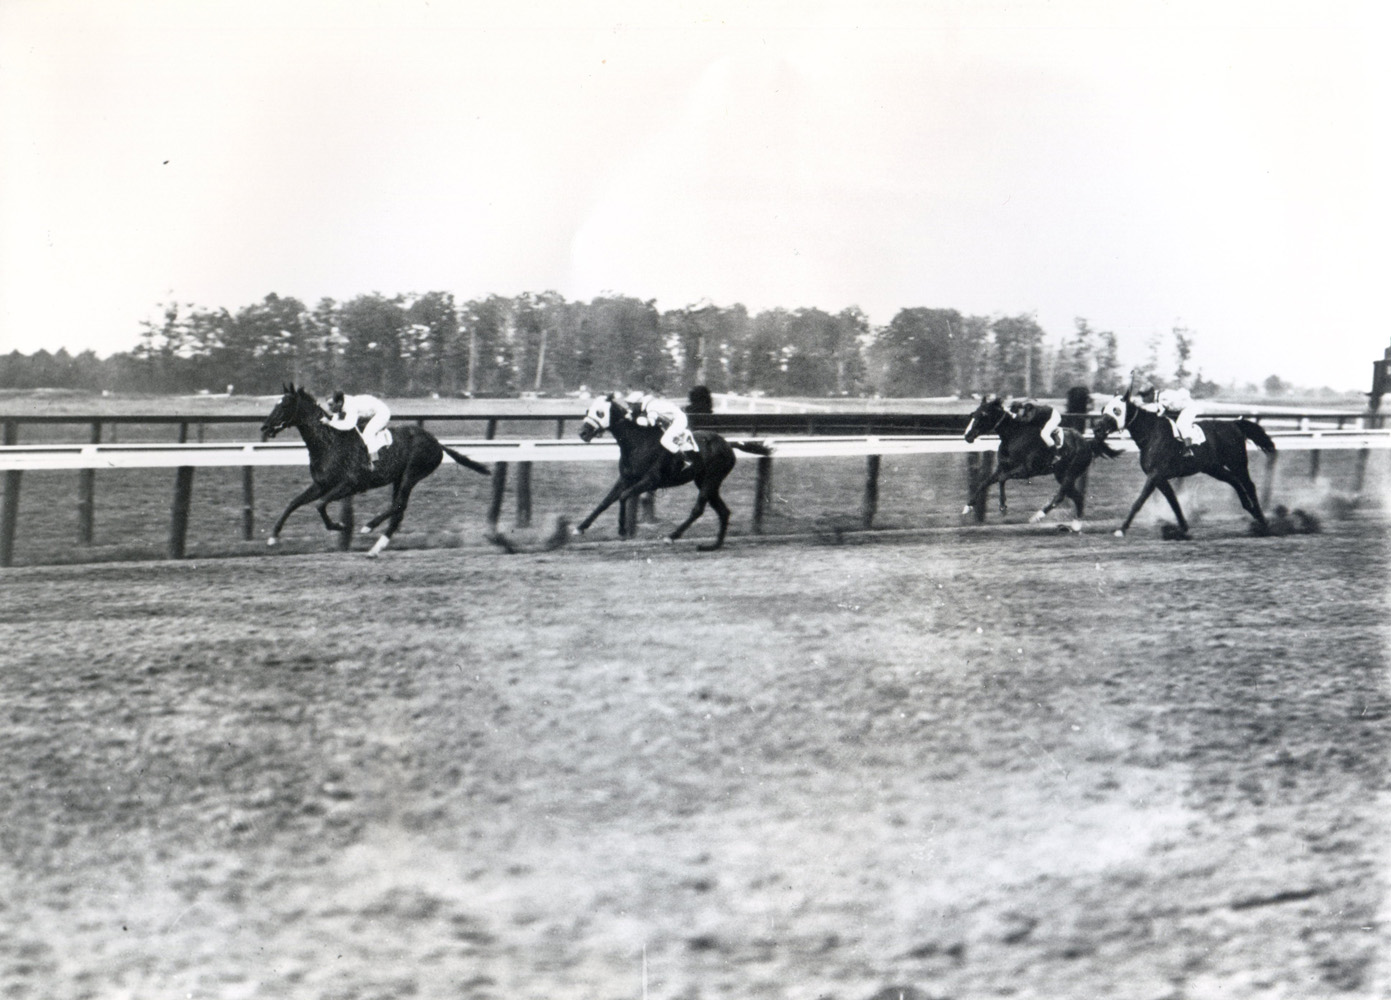 Whisk Broom II (Joe Notter up) winning the 1913 Metropolitan Handicap at Belmont, his first American race (Keeneland Library Cook Collection/Museum Collection)